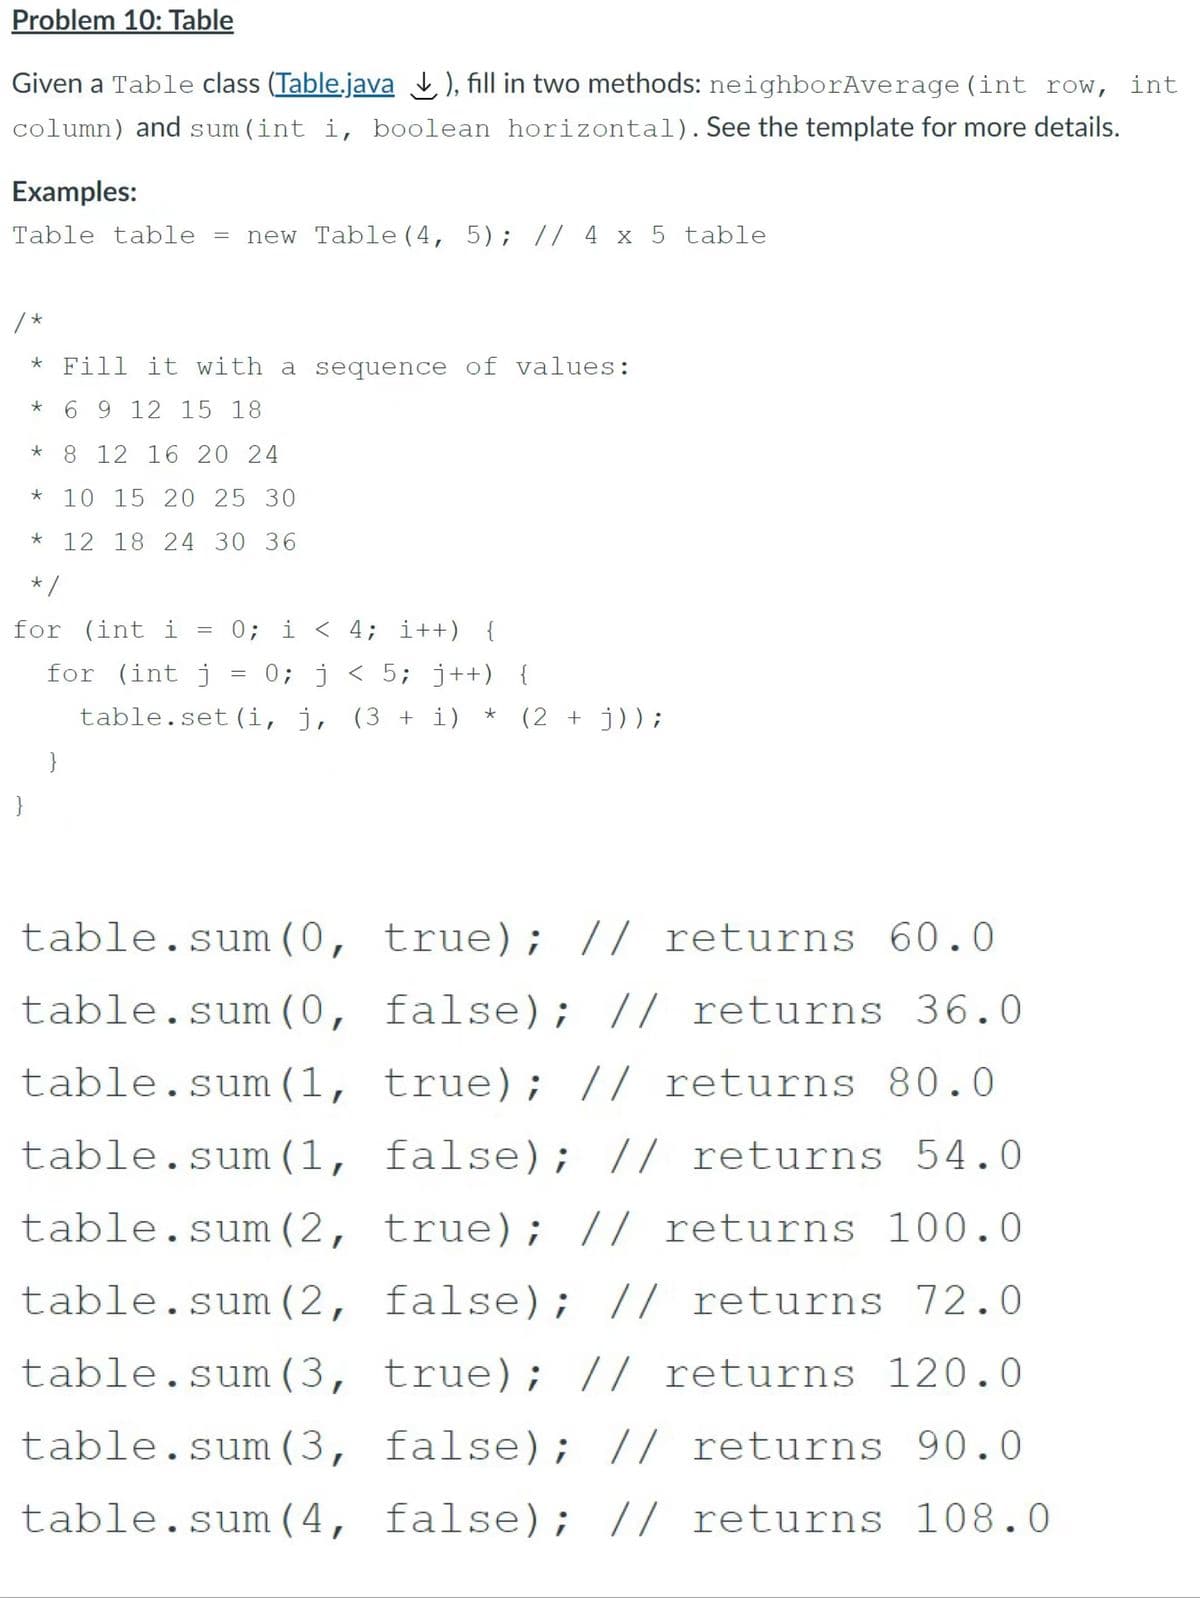 Problem 10: Table
Given a Table class (Table.java ), fill in two methods: neighborAverage (int row, int
column) and sum(int i, boolean horizontal).See the template for more details.
Examples:
Table table =
new Table (4, 5); // 4 x 5 table
/ *
* Fill it with a sequence of values:
* 6 9 12 15 18
8 12 16 20 24
* 10 15 20 25 30
* 12 18 24 30 36
* /
for (int i = 0; i < 4; i++) {
for (int j
= 0; j < 5; j++) {
table.set(i, j, (3 + i)
(2 + j));
}
}
table.sum (0, true); // returns 60.0
table.sum (0, false); // returns 36.0
table.sum (1, true); // returns 80.0
table.sum (1, false); // returns 54.0
table.sum (2, true); // returns 100.0
table.sum (2, false); // returns 72.0
table.sum (3, true); // returns 120.0
table.sum (3, false); // returns 90.0
table.sum ( 4, false); // returns 108.0
